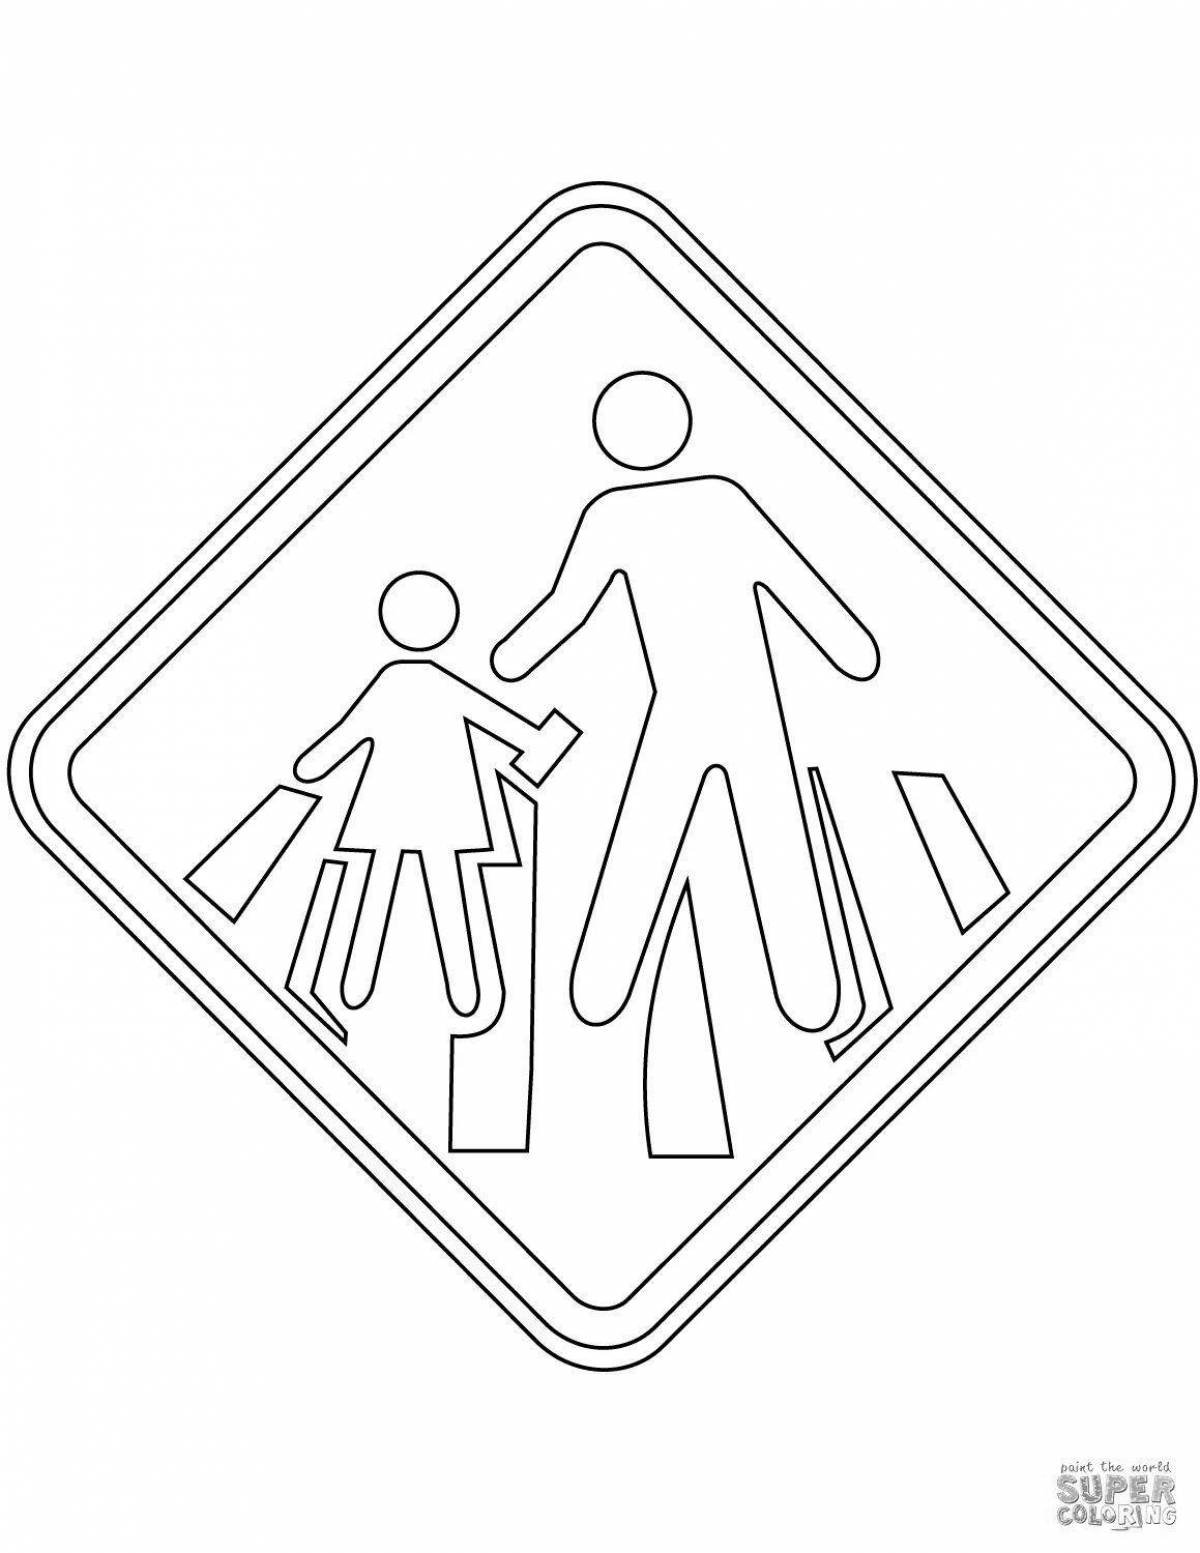 Coloring page dazzling overpass sign